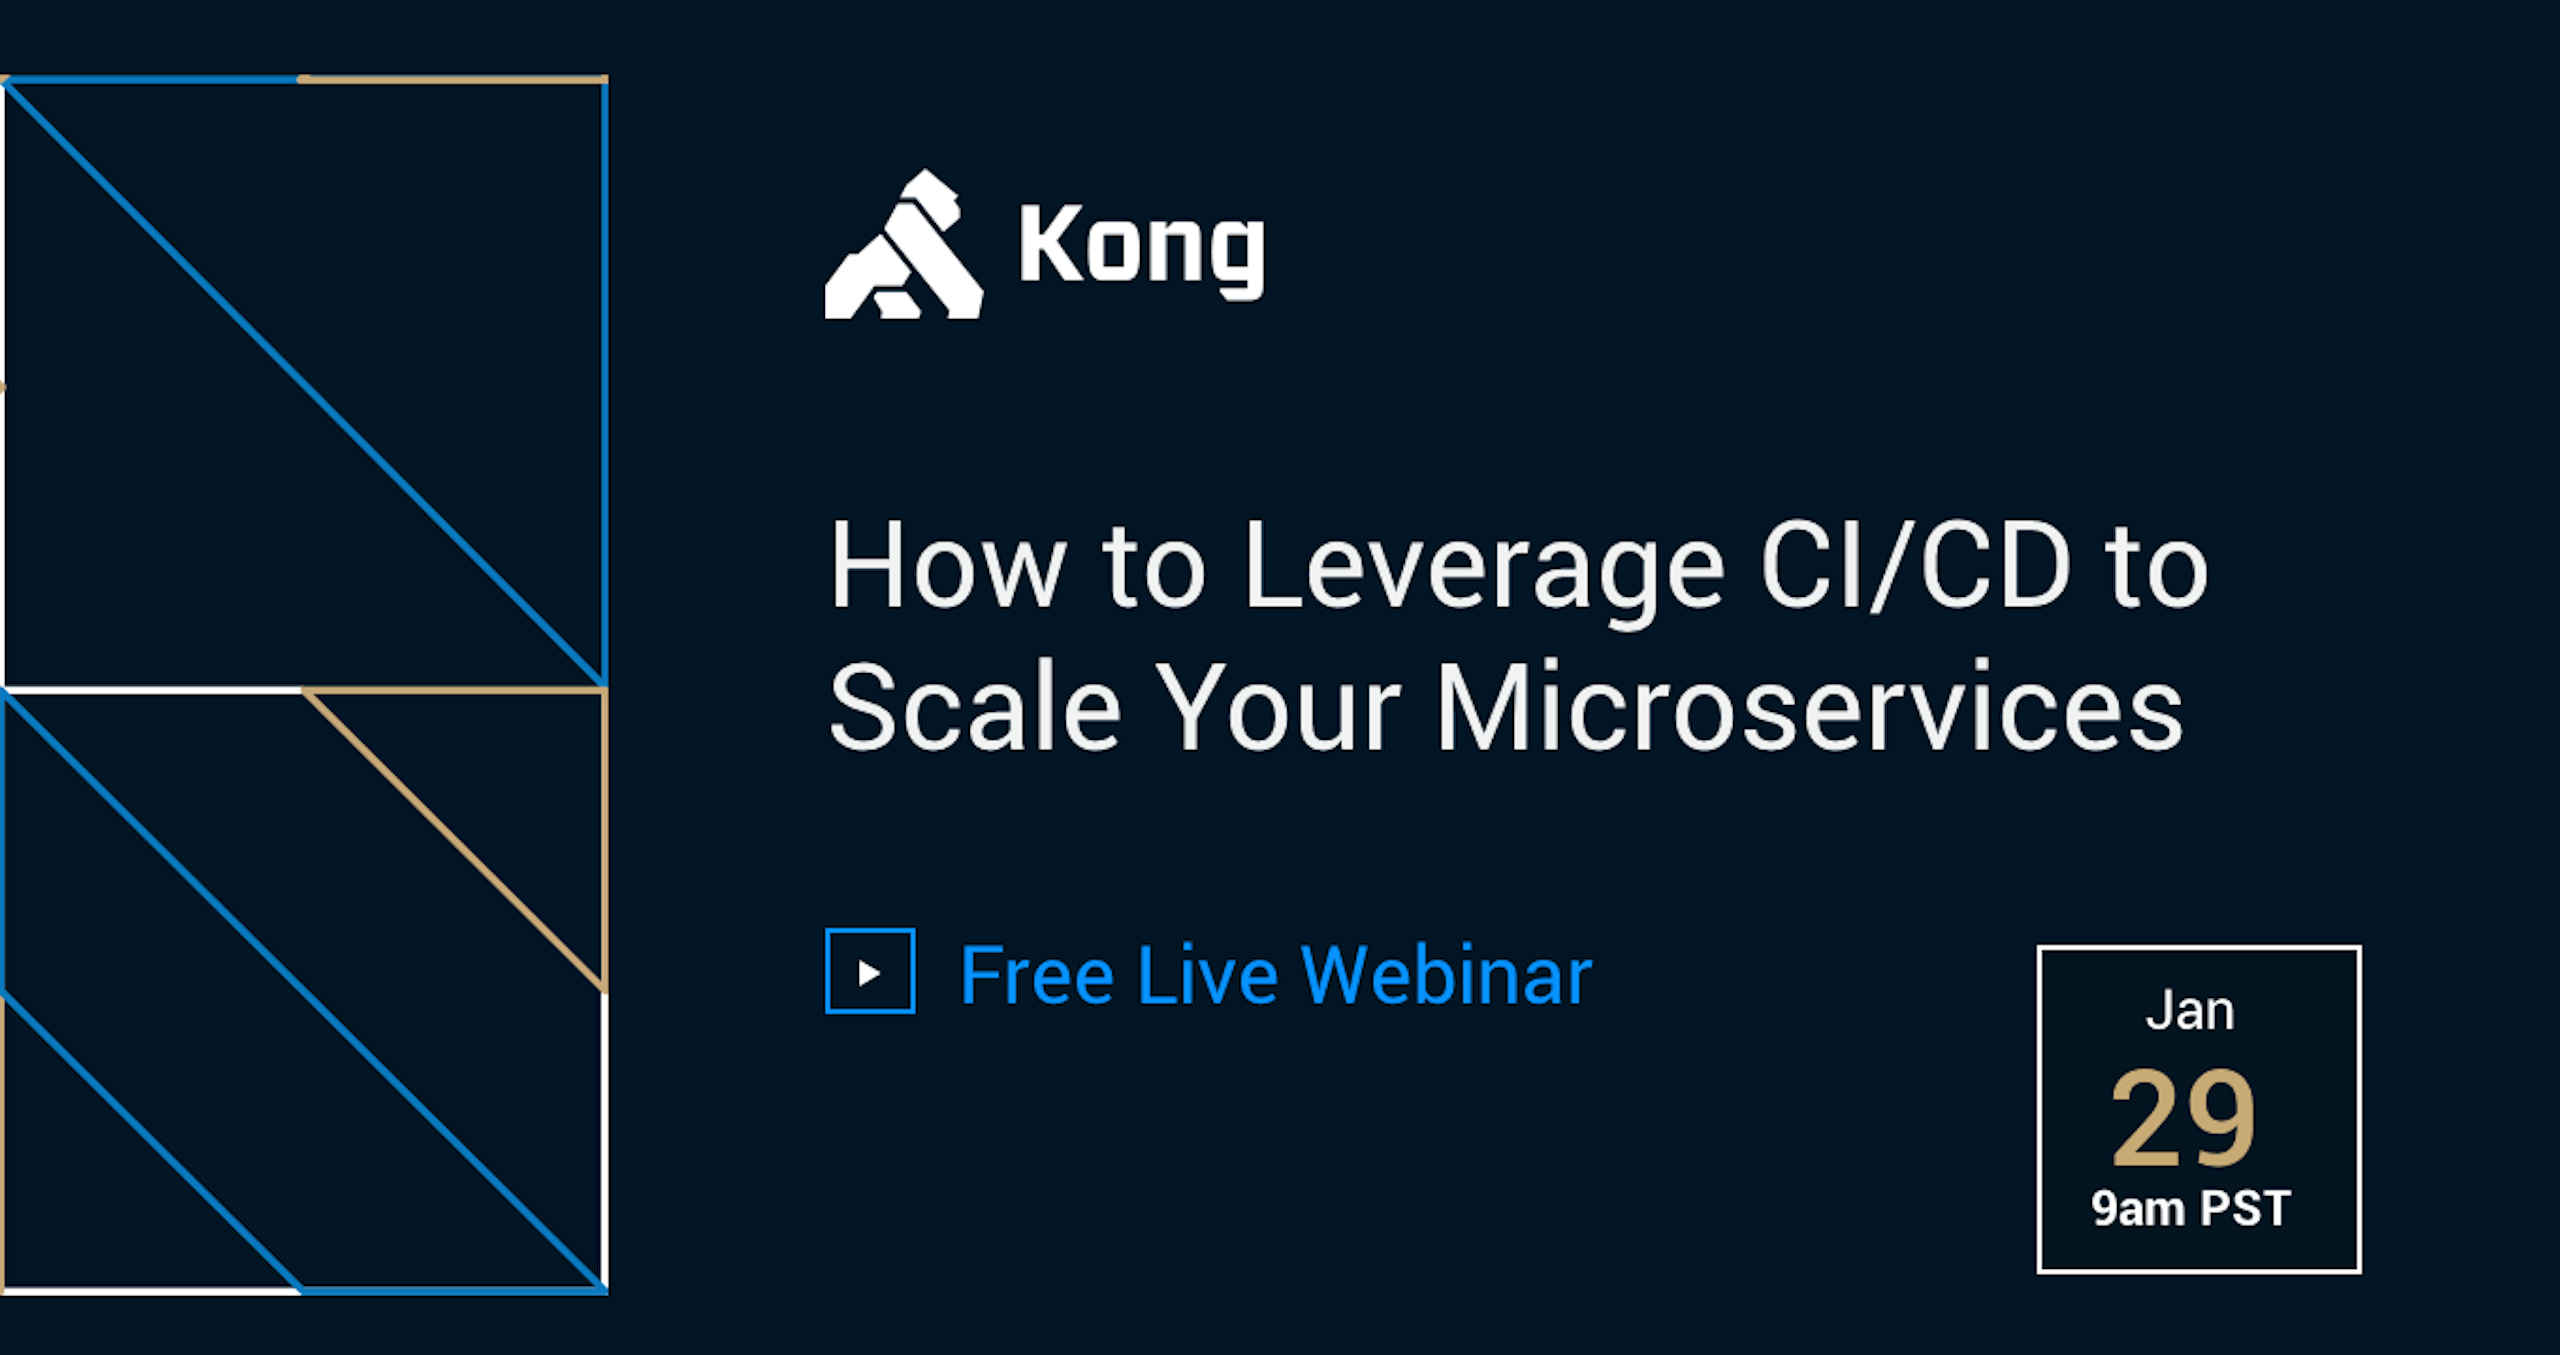 How to Leverage CI/CD to Scale Your Microservices